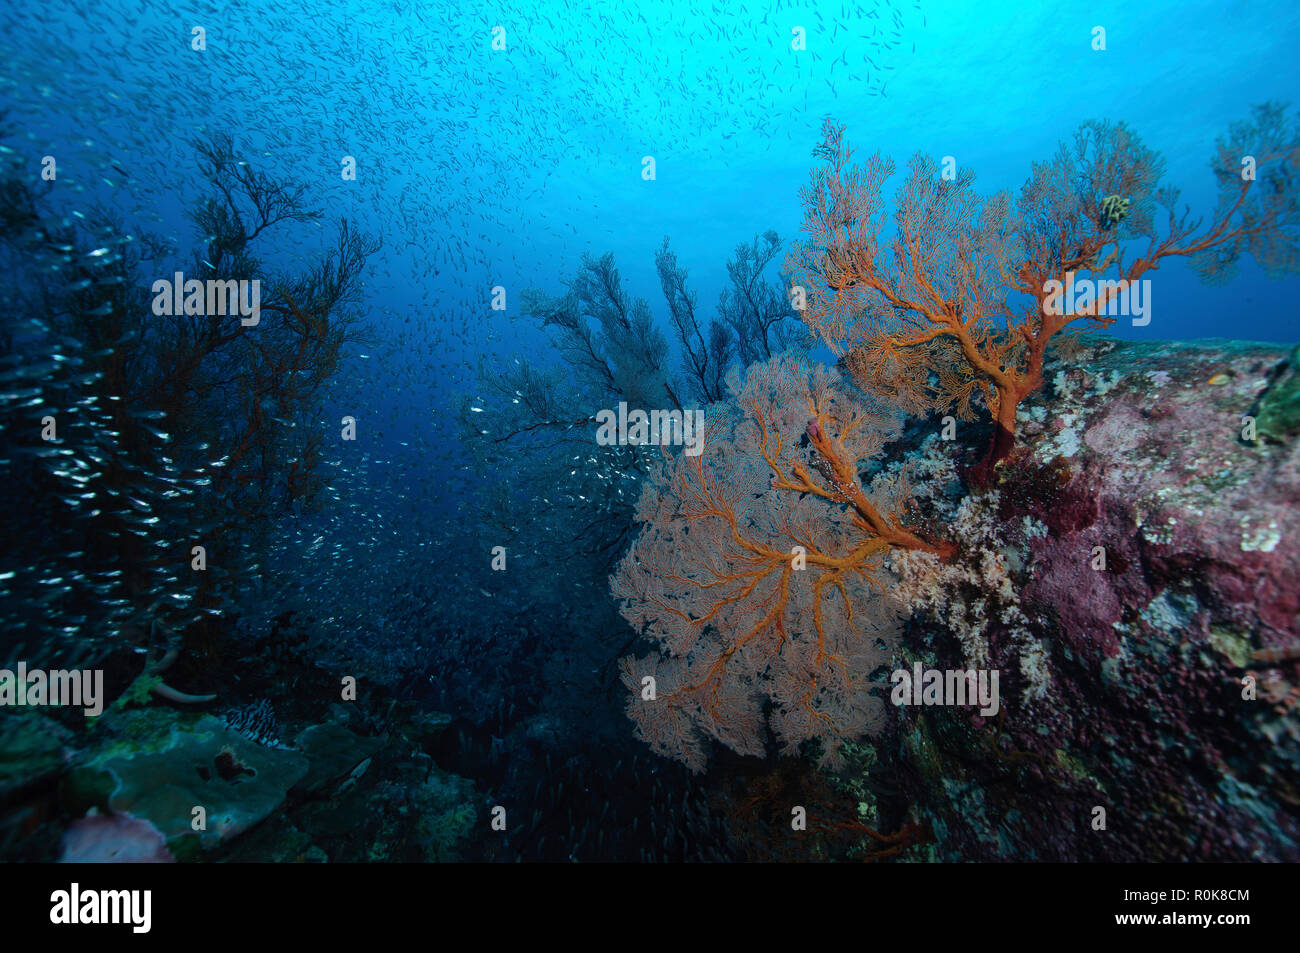 Hard coral reef with school of fish, Koh Tachai, Similan Islands, Thailand. Stock Photo